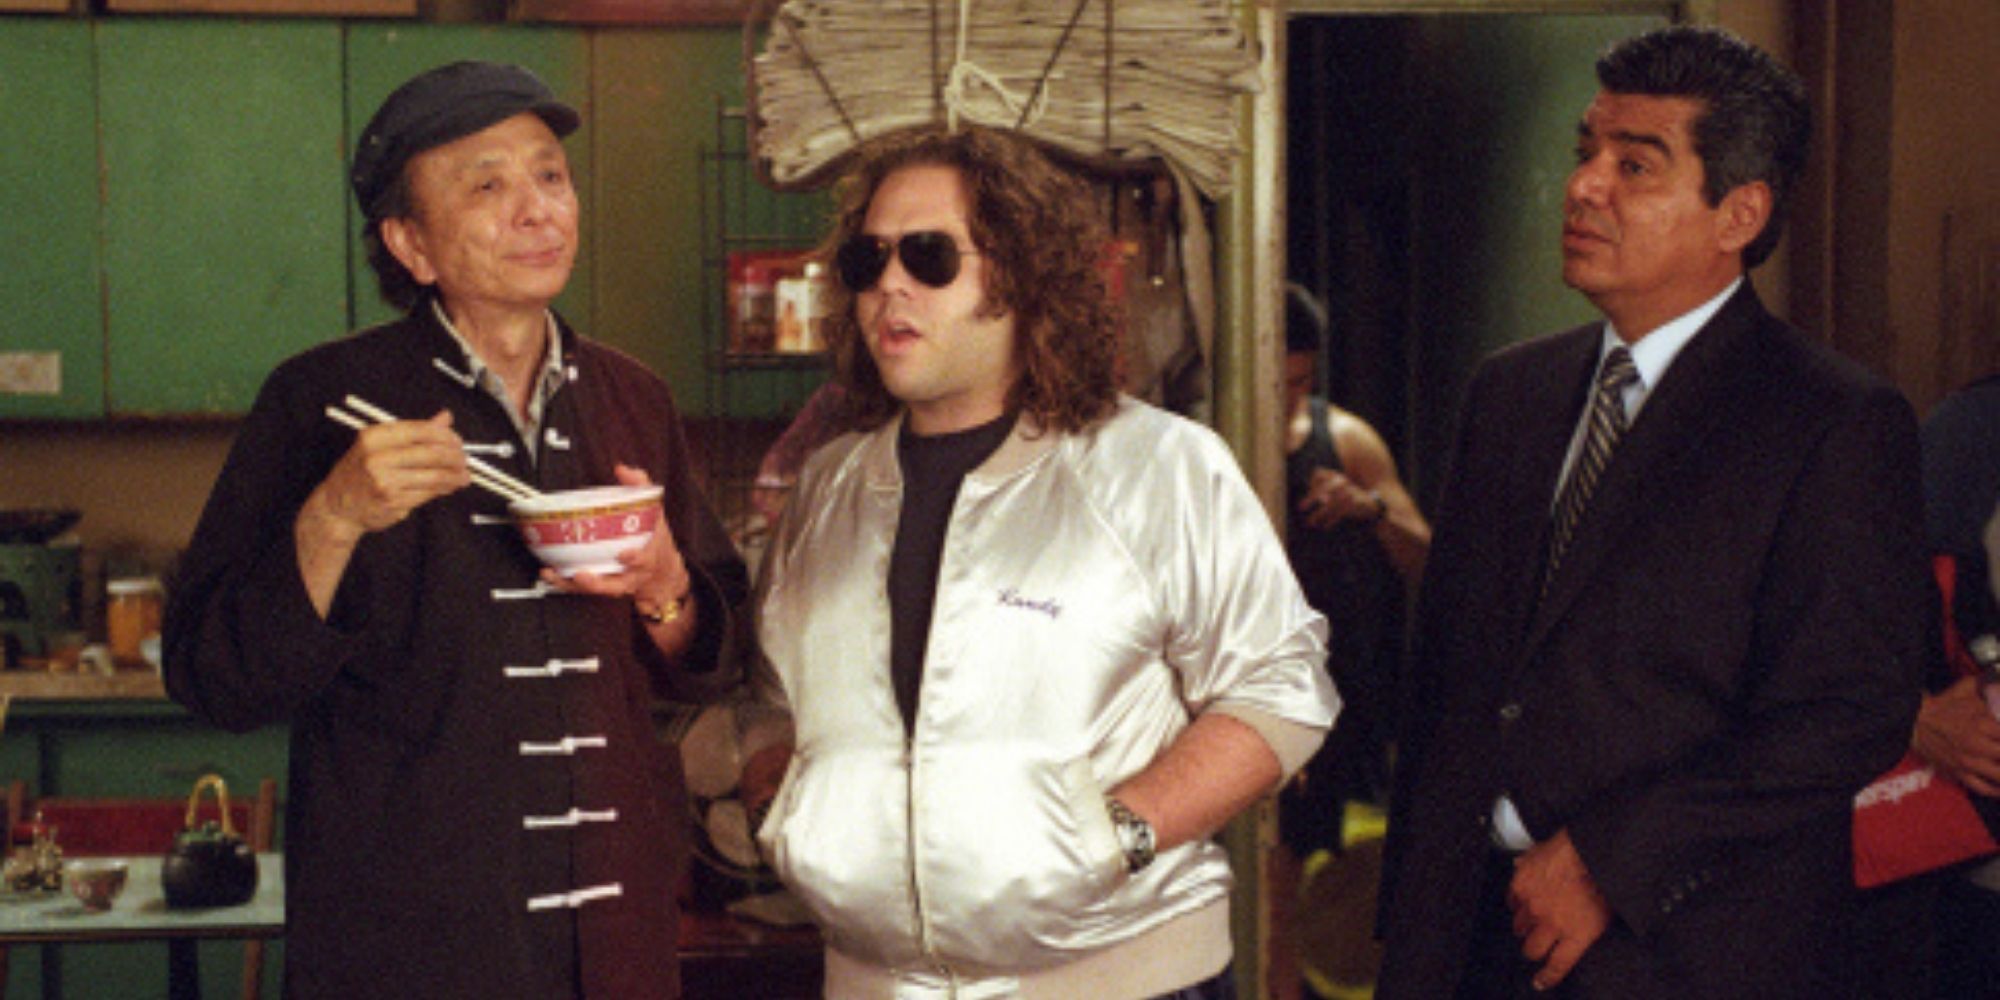 james hong in balls of fury with george lopez eats pork with man in sunglasses